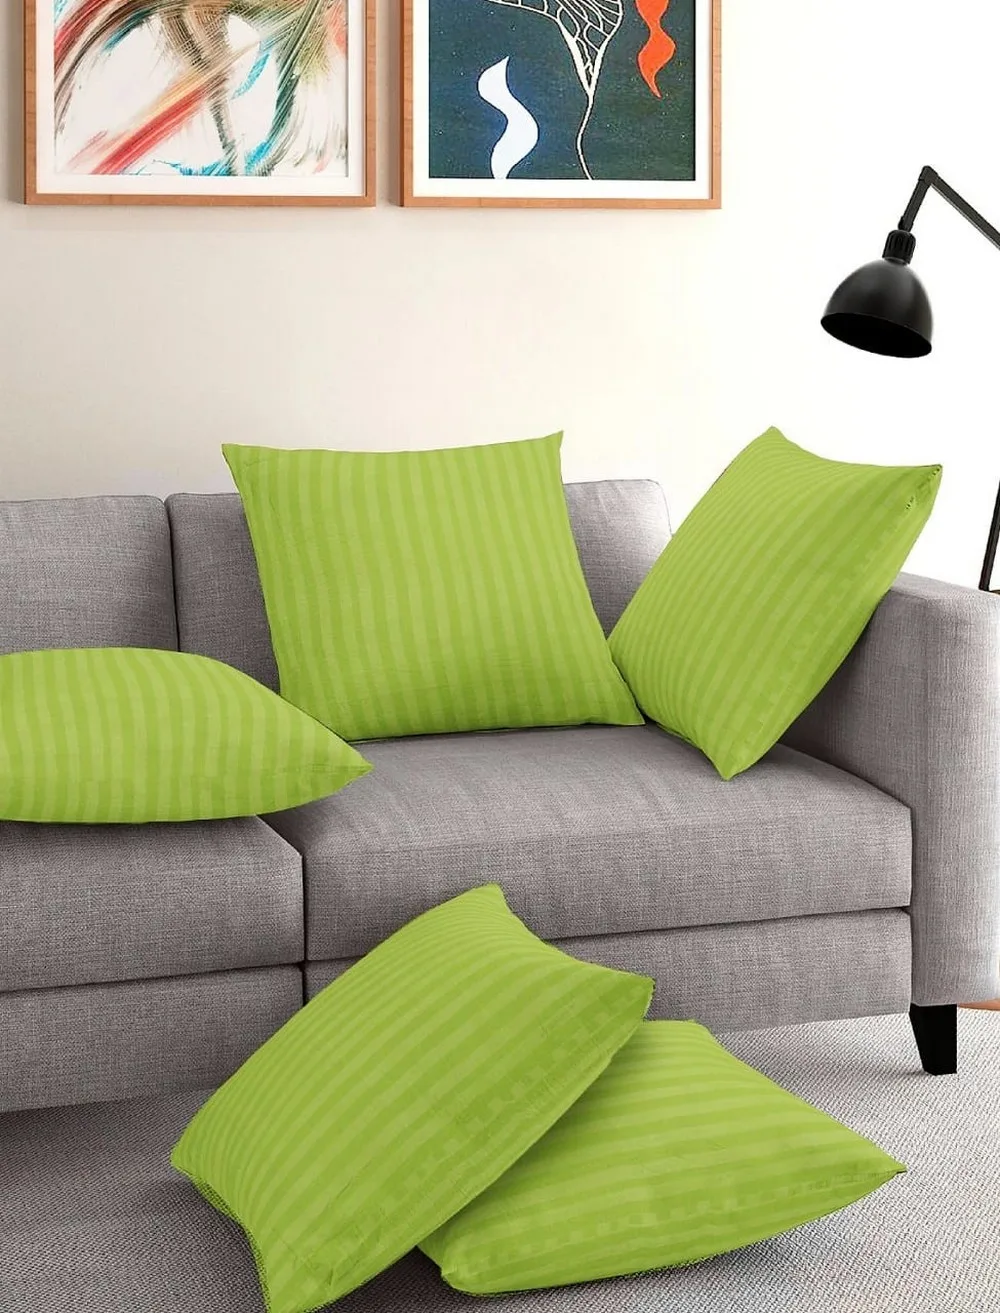 Cushion cover striped, glace cotton, 16x16, Set of 5, lemon green